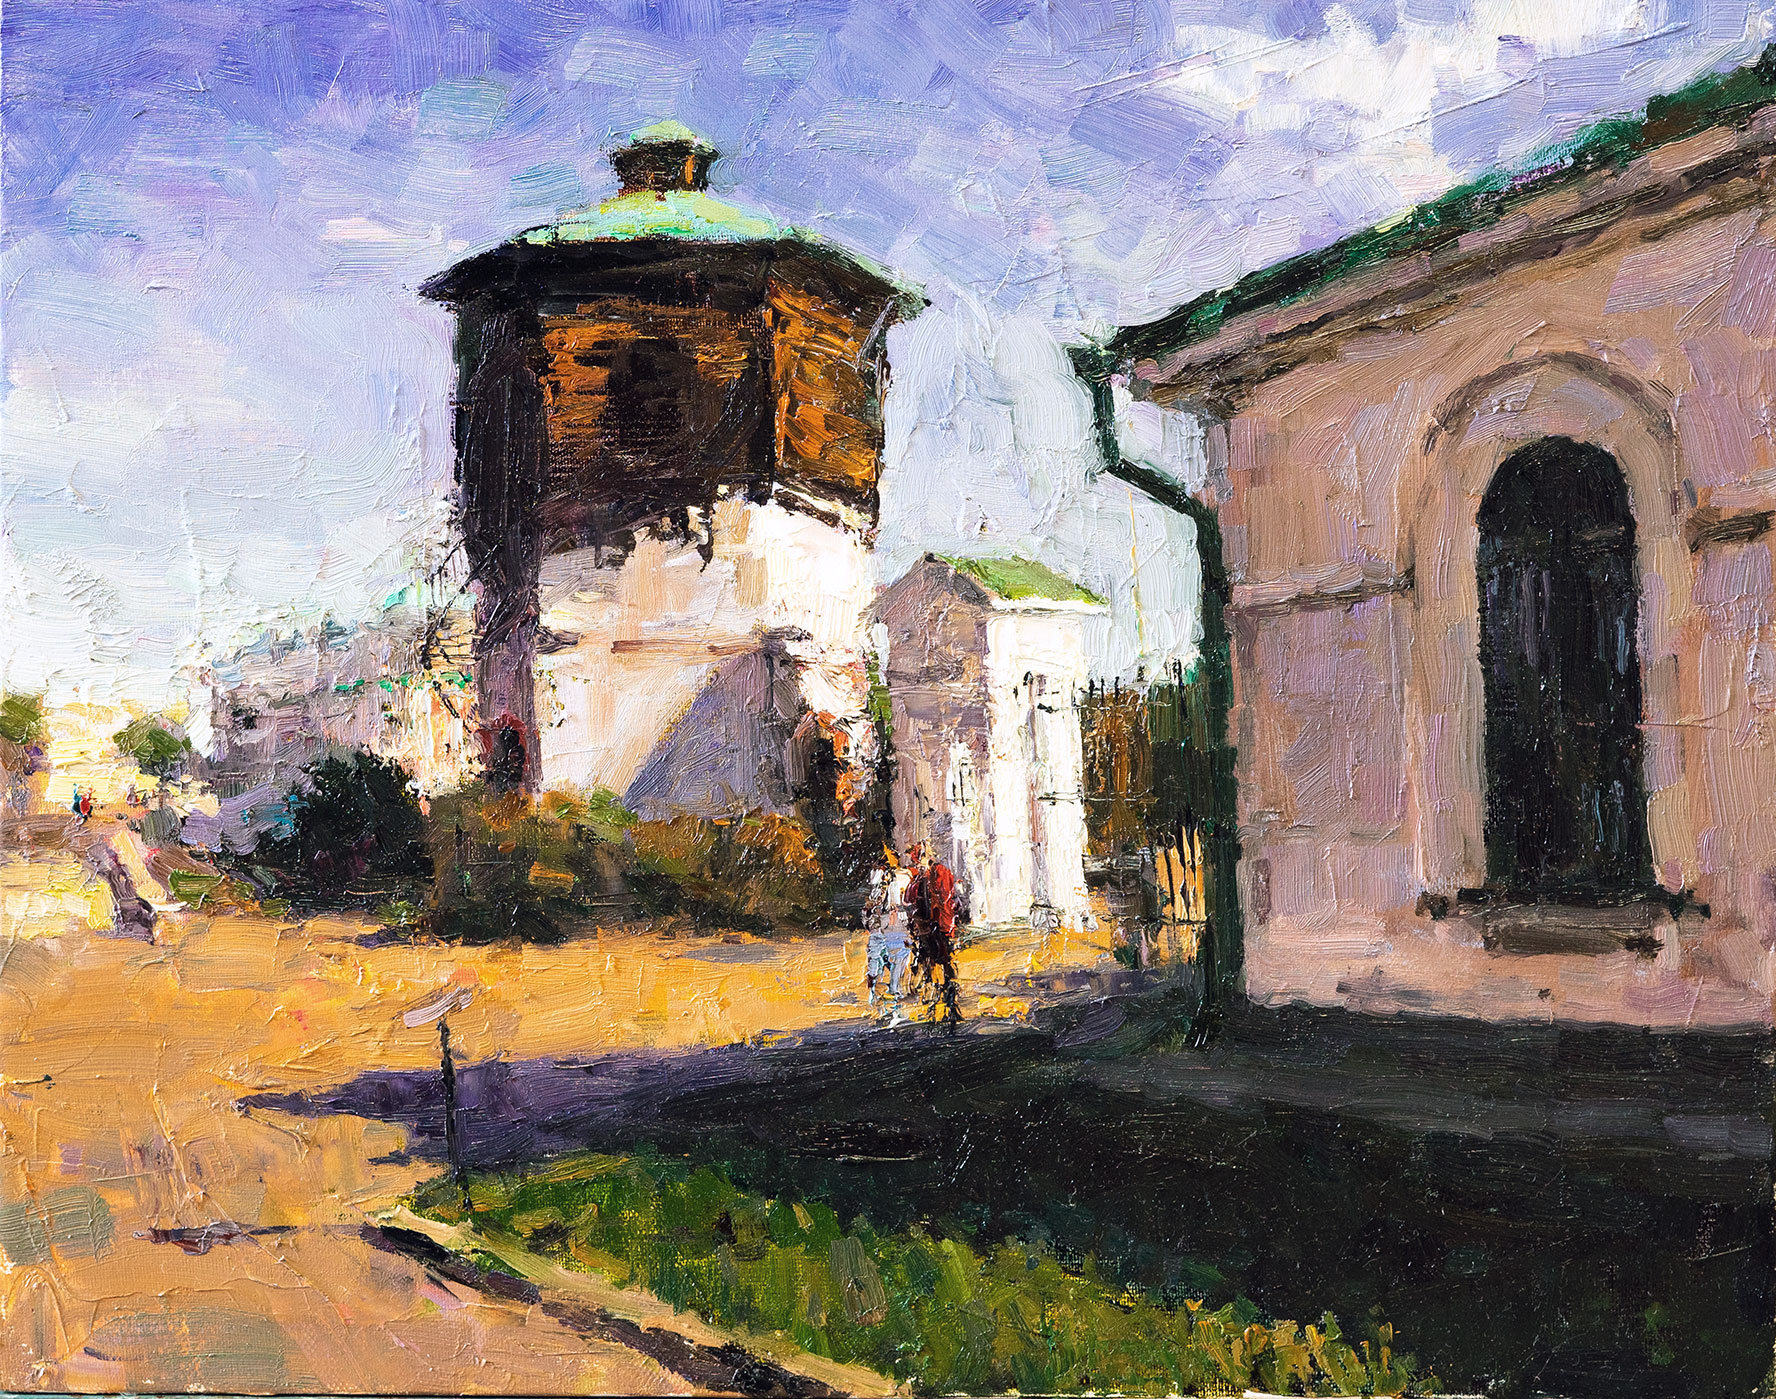 Sunny Day - 1, Sergei Prokhorov, Buy the painting Oil